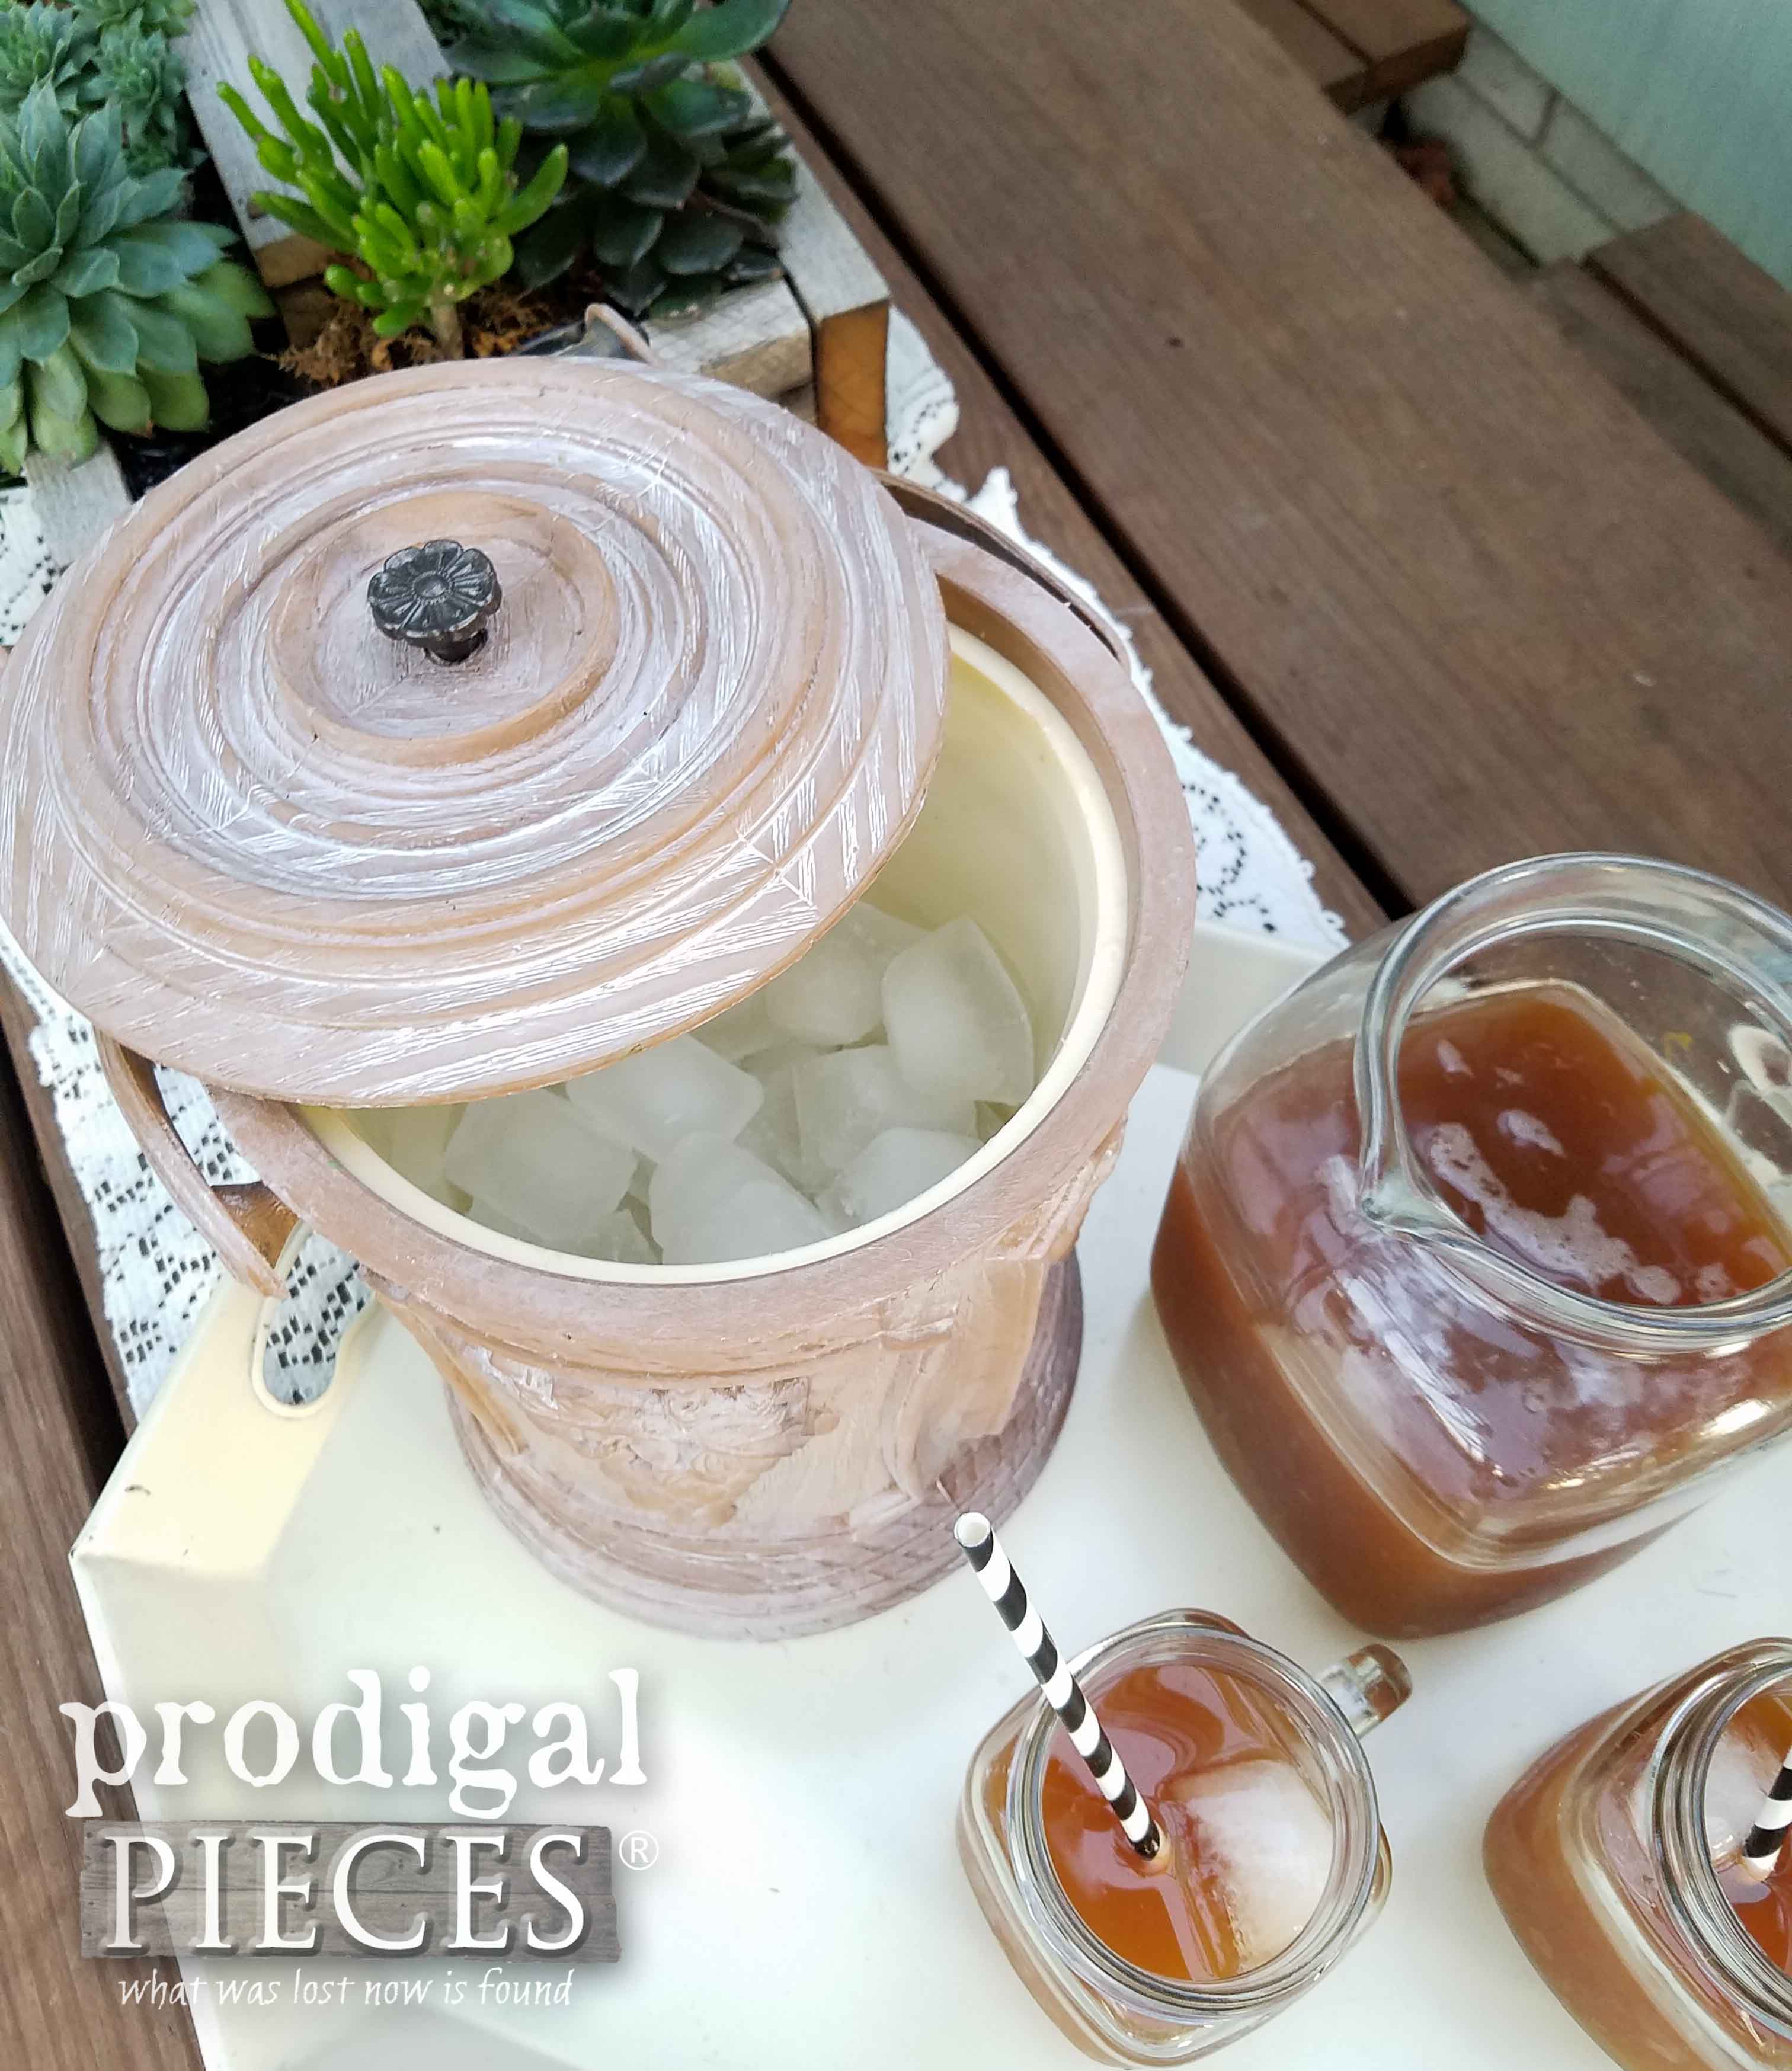 Vintage Ice Bucket Made New by Prodigal Pieces | prodigalpieces.com